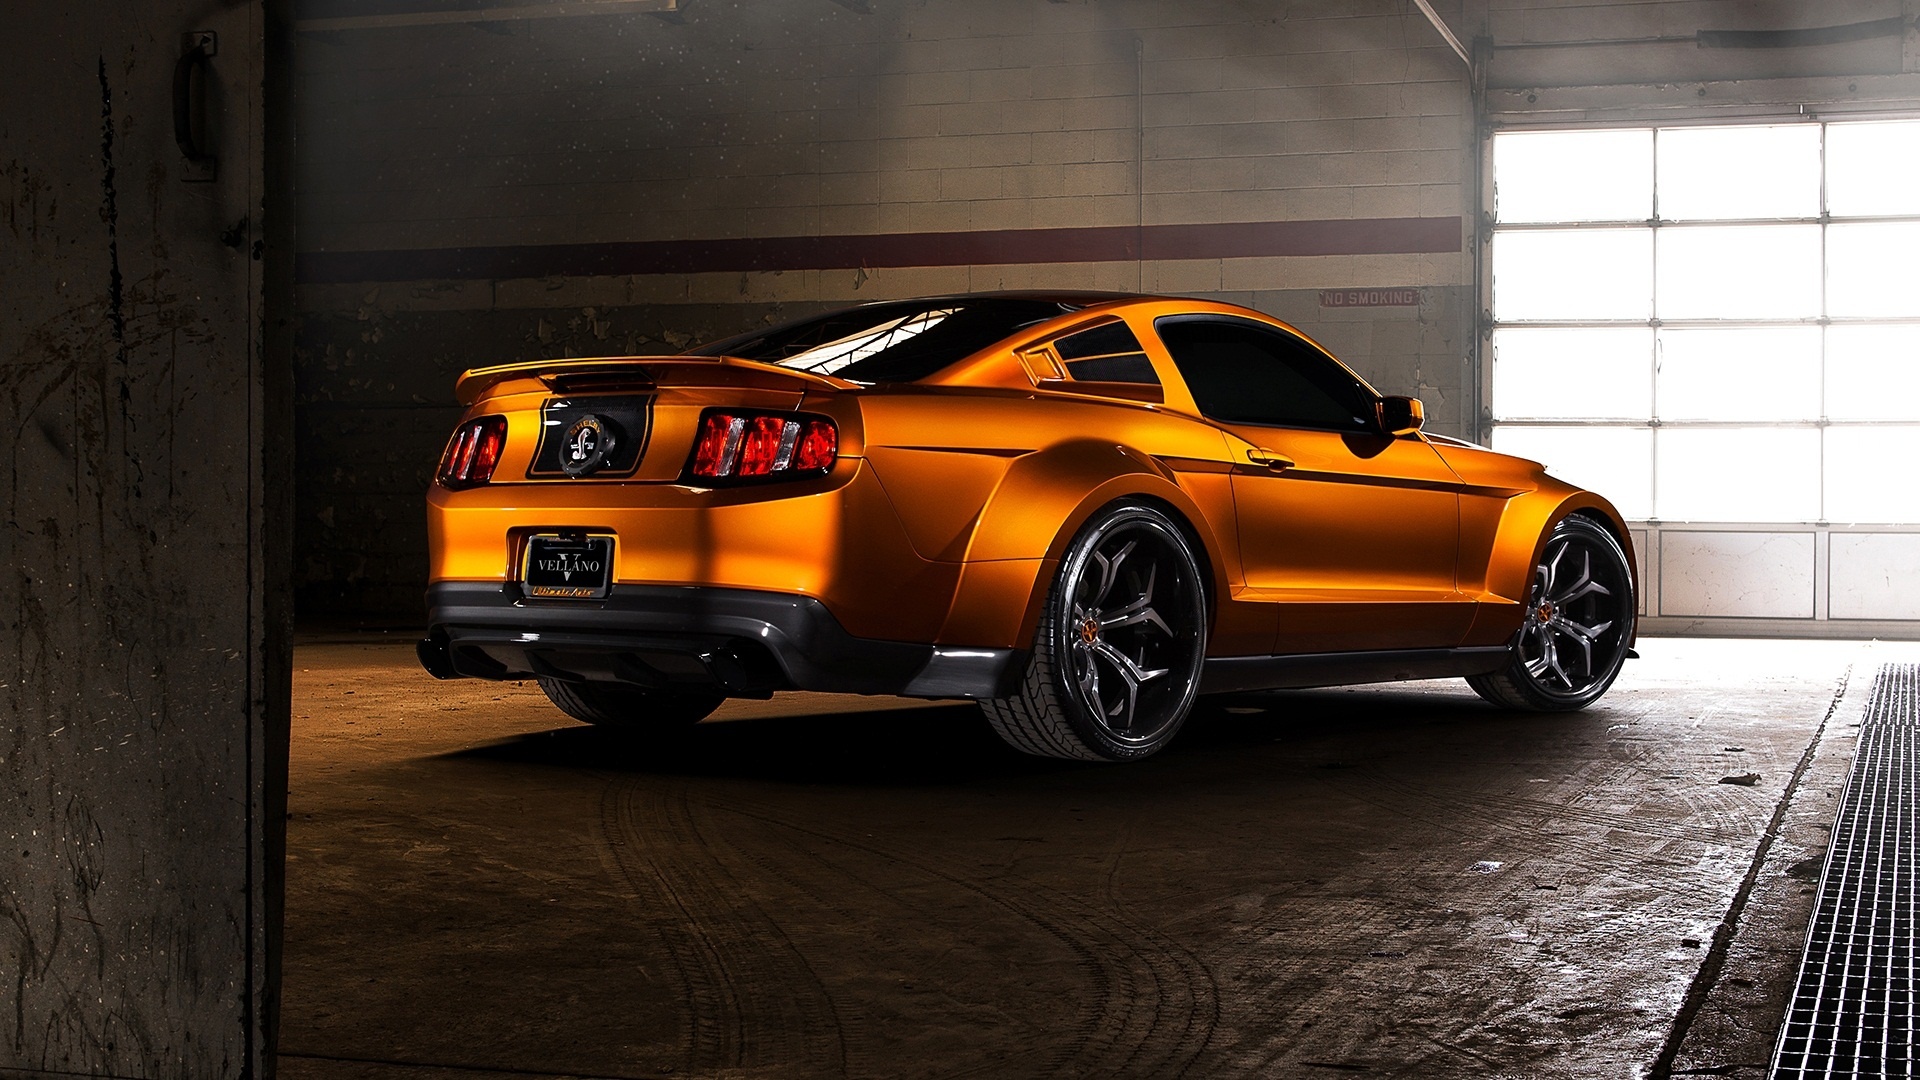 Shelby Ford Mustang Gt500 - 2014 Shelby Mustang Colors - HD Wallpaper 